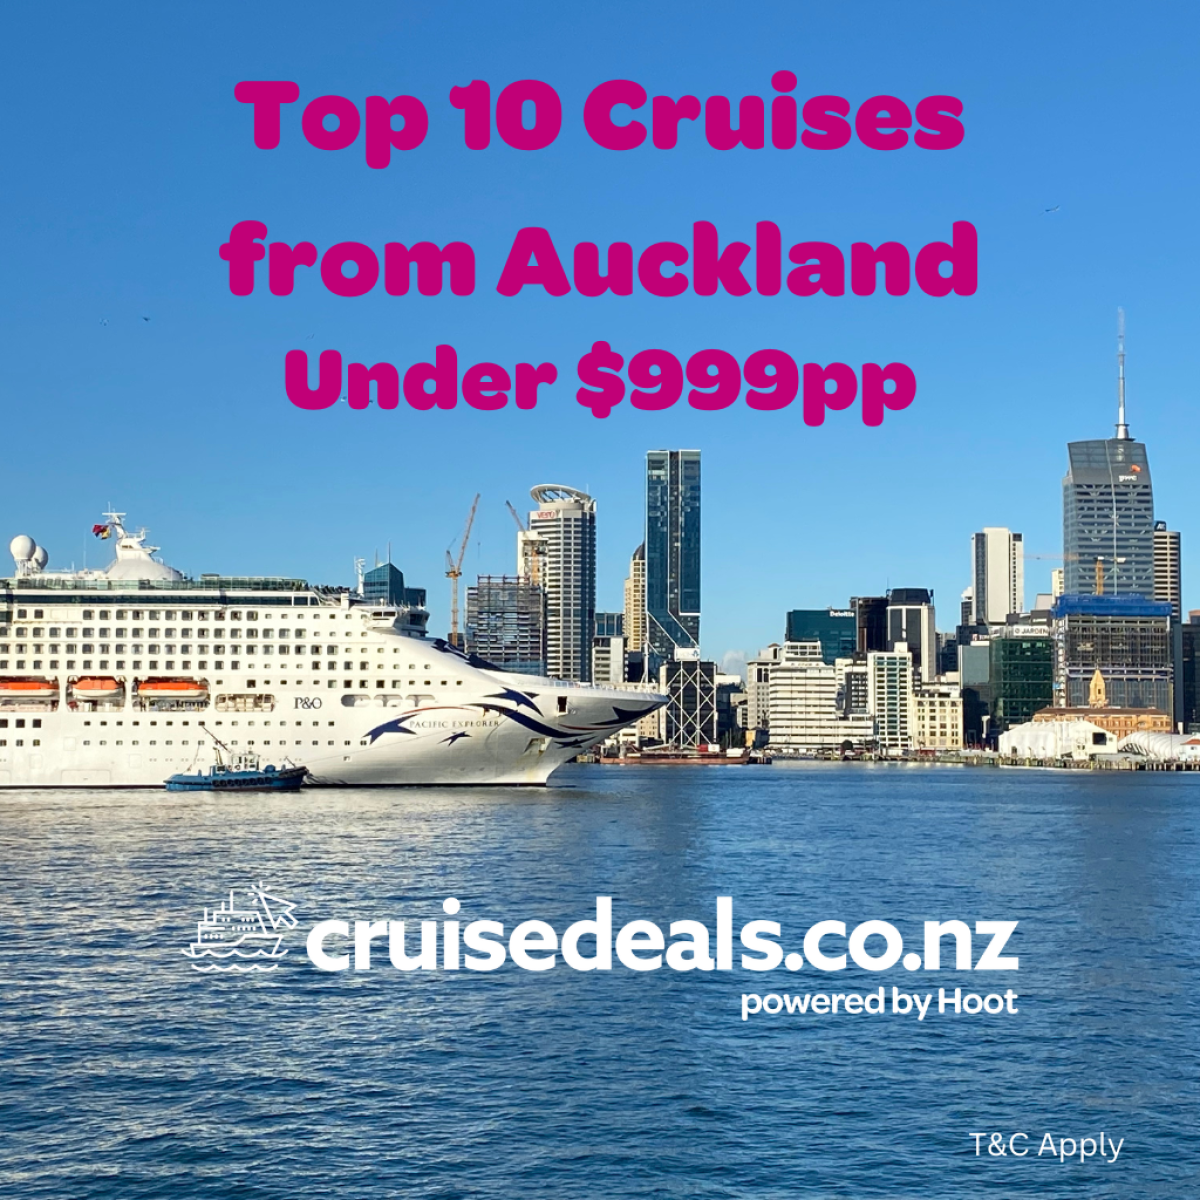 Last Minute Cruise Offers under $999pp